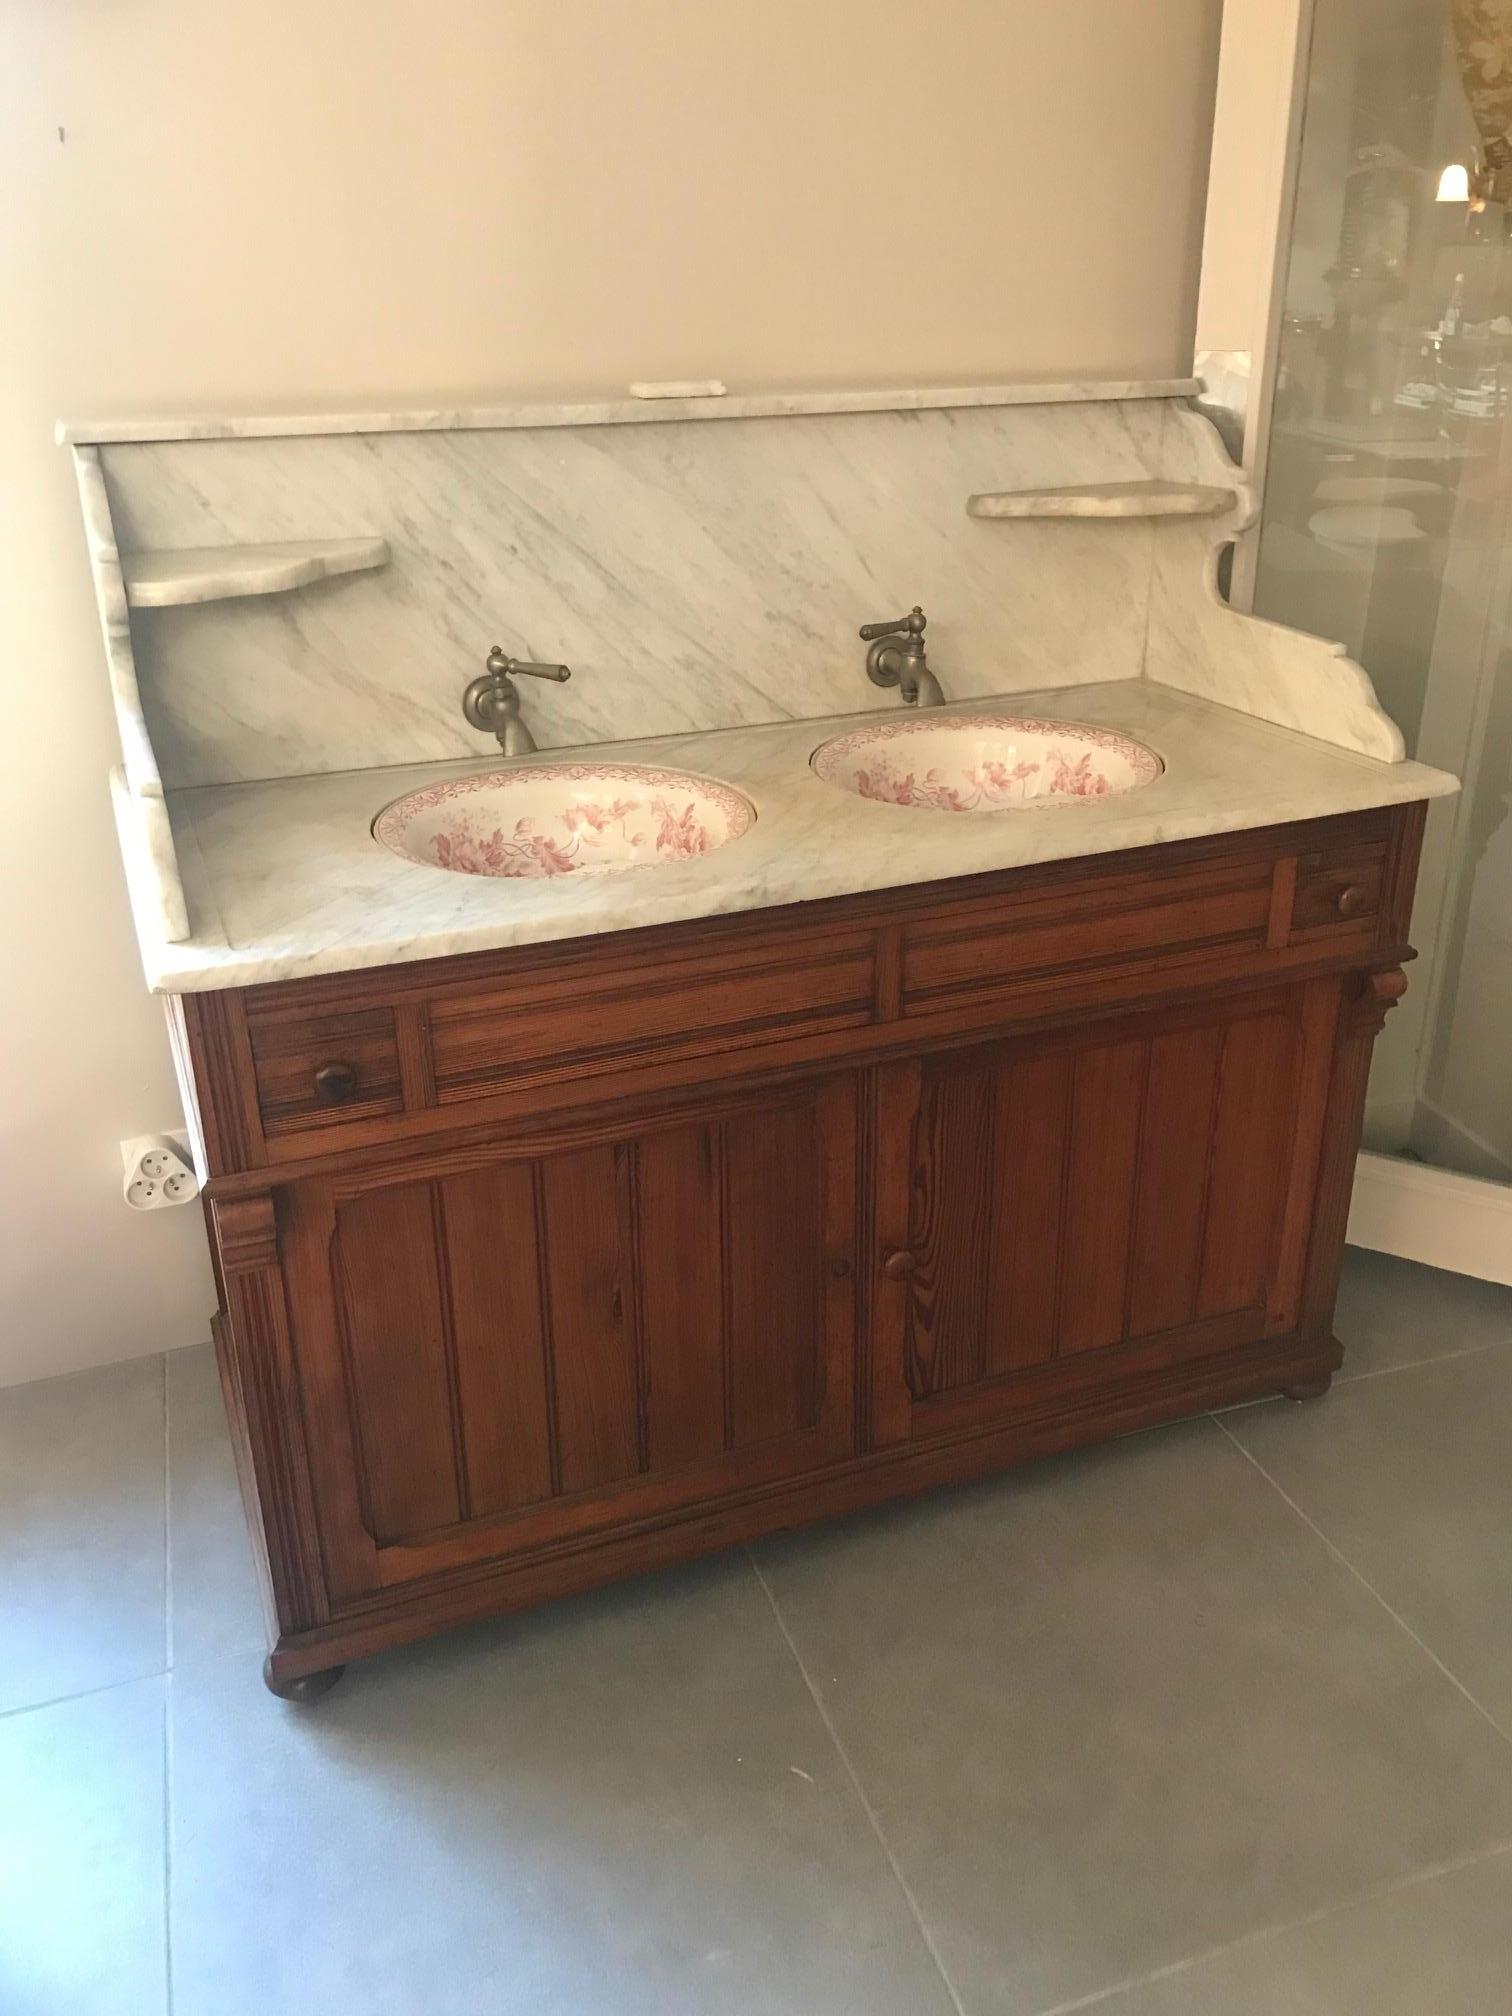 Very nice 20th century French pitch pine and removable marble bathroom cabinet from the 1900s.
The marble top is removable. Two antiques porcelain sinks with manufacturer signature at the back.
At the beginning, the sinks were swinging to let the